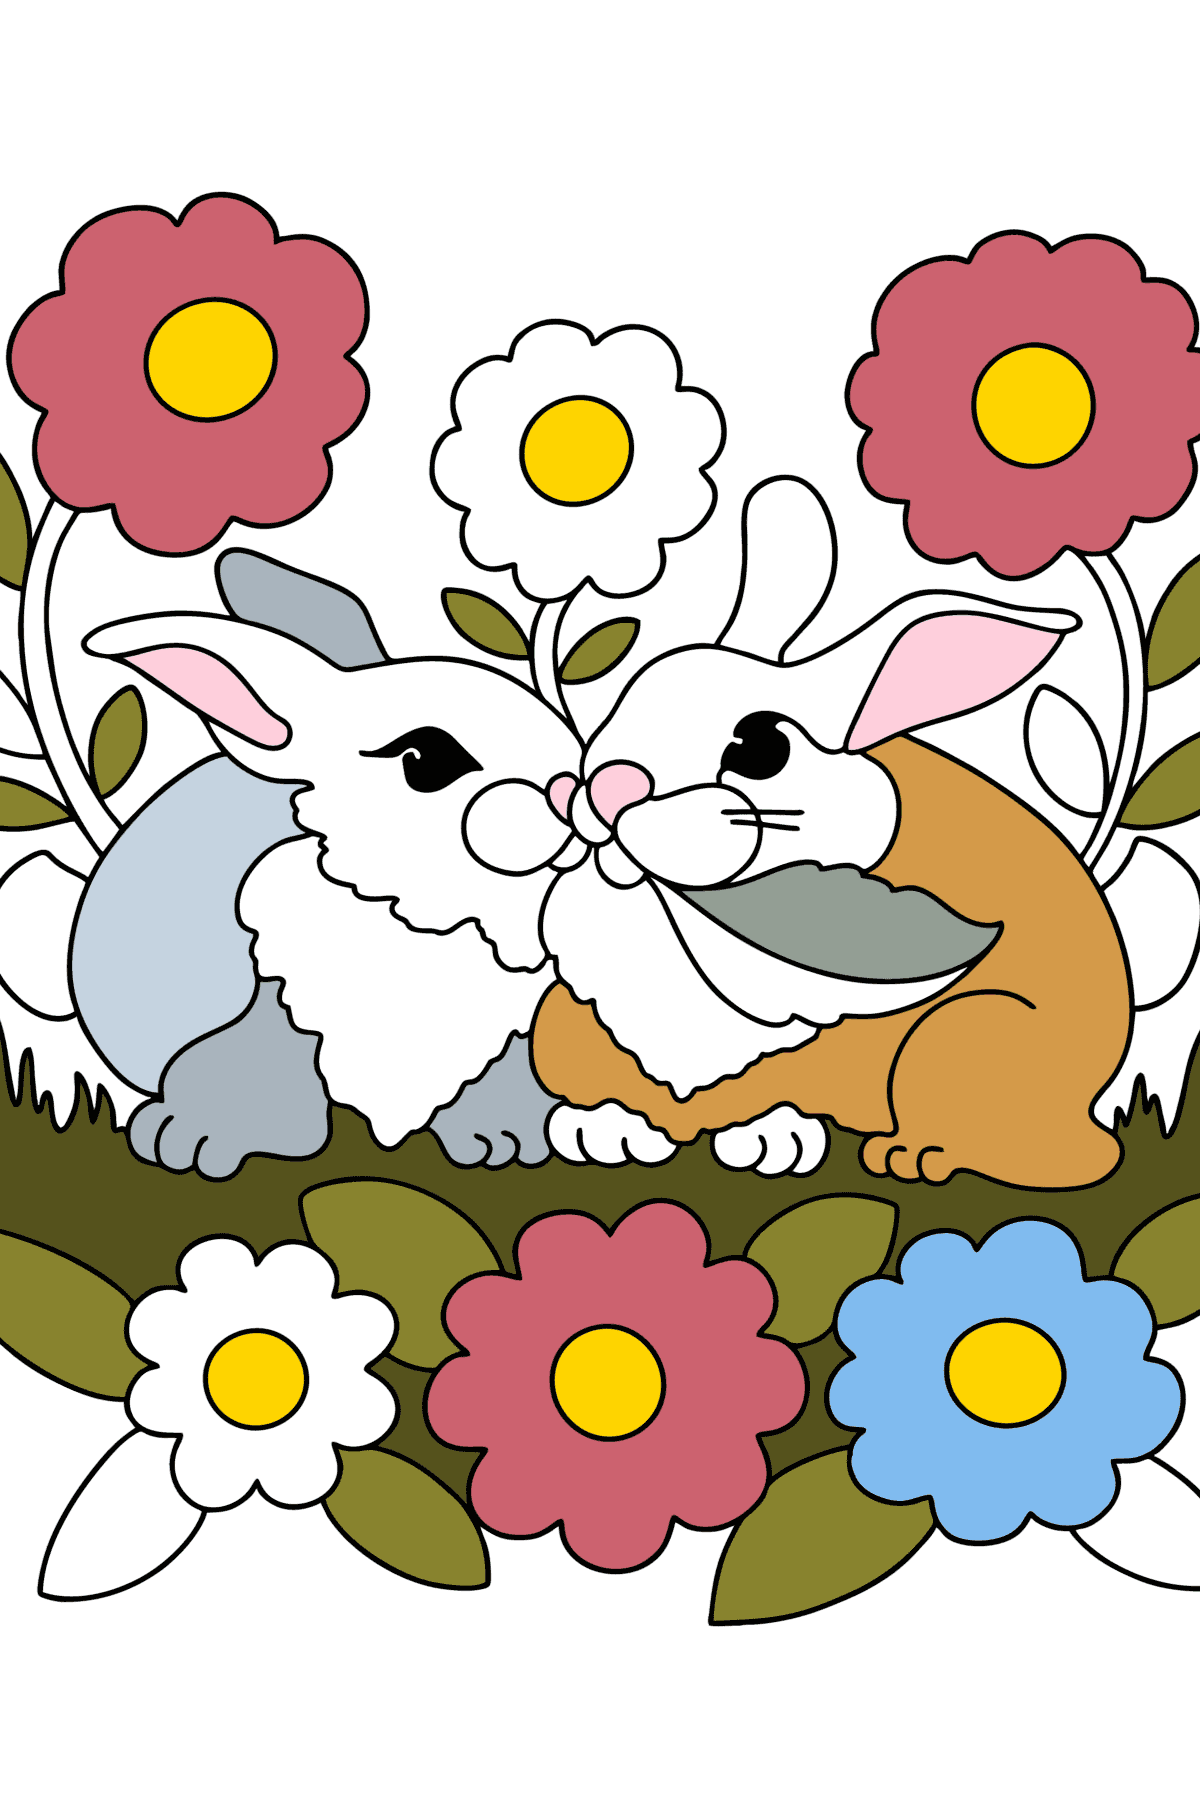 Cute Rabbits Coloring page - Coloring Pages for Kids